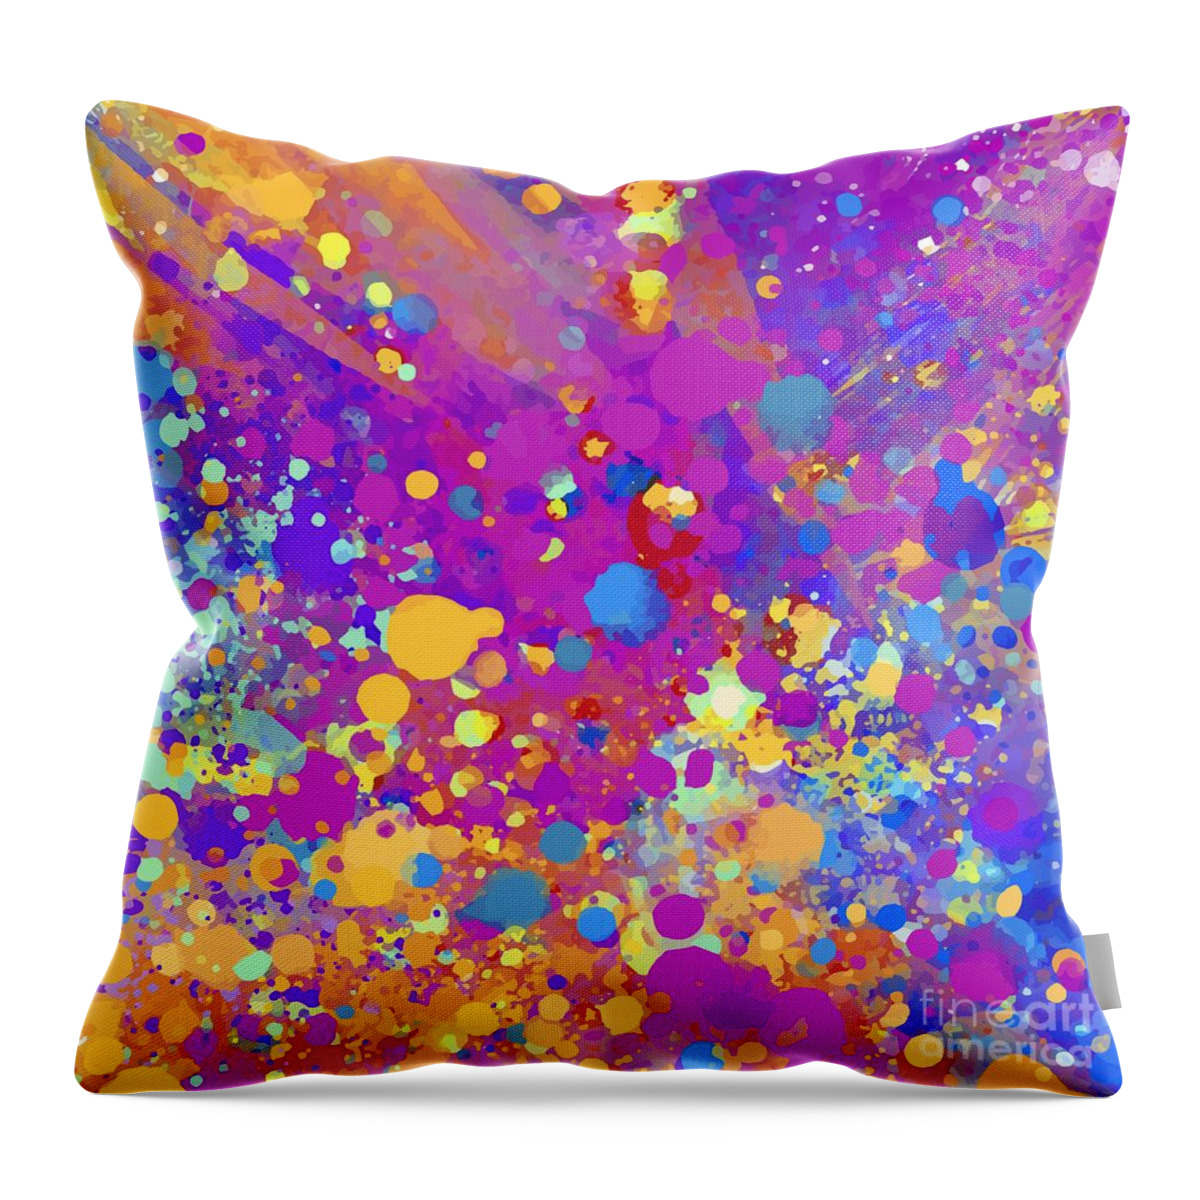 Colorful Throw Pillow featuring the digital art Kartika - Artistic Colorful Abstract Carnival Splatter Watercolor Digital Art by Sambel Pedes